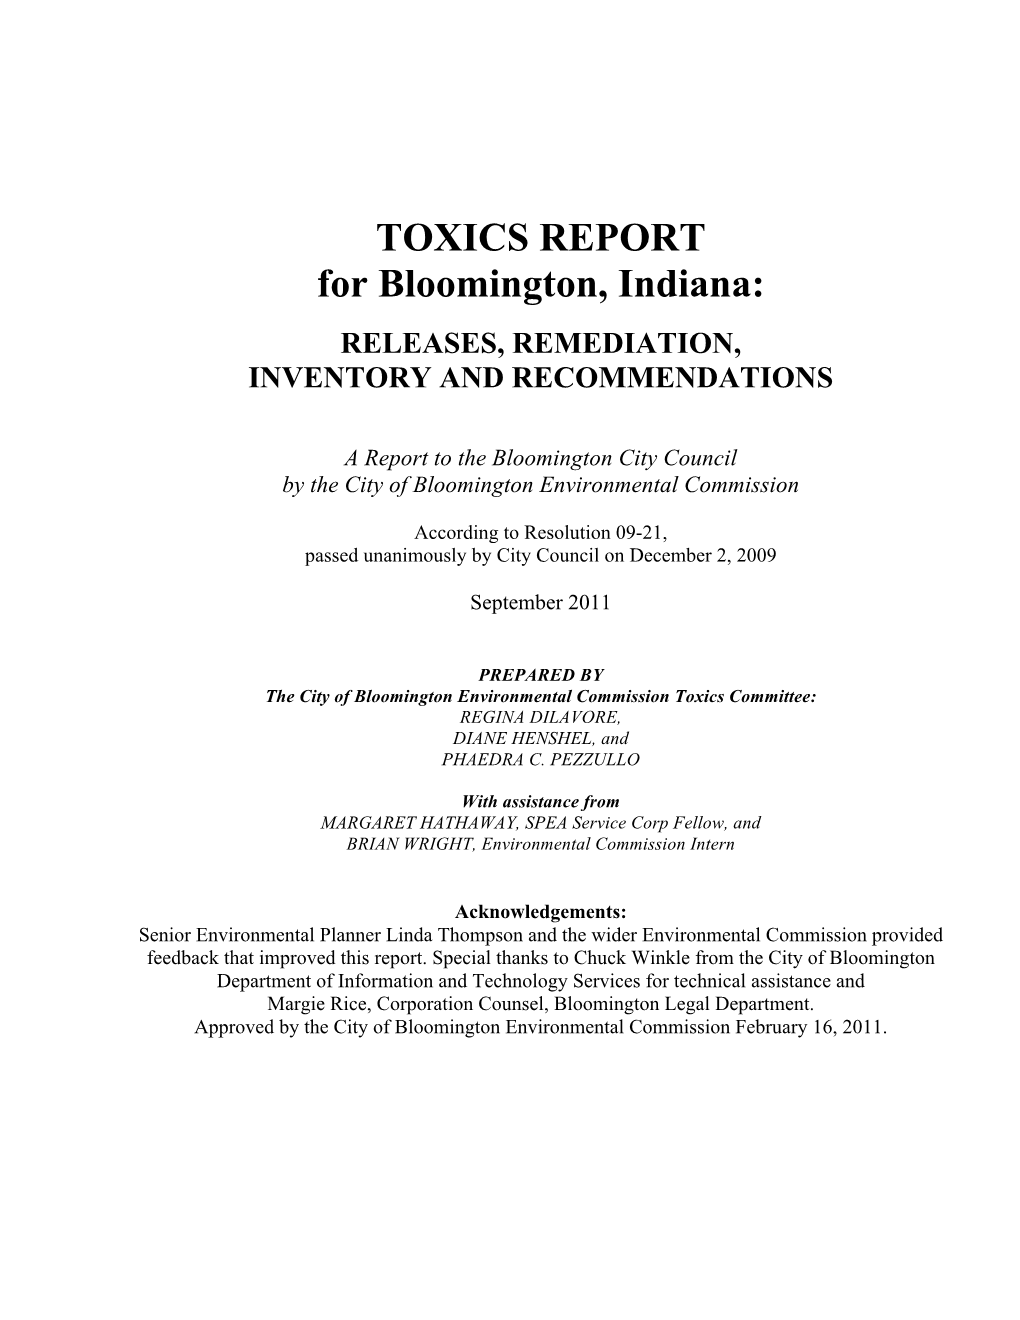 TOXICS REPORT for Bloomington, Indiana